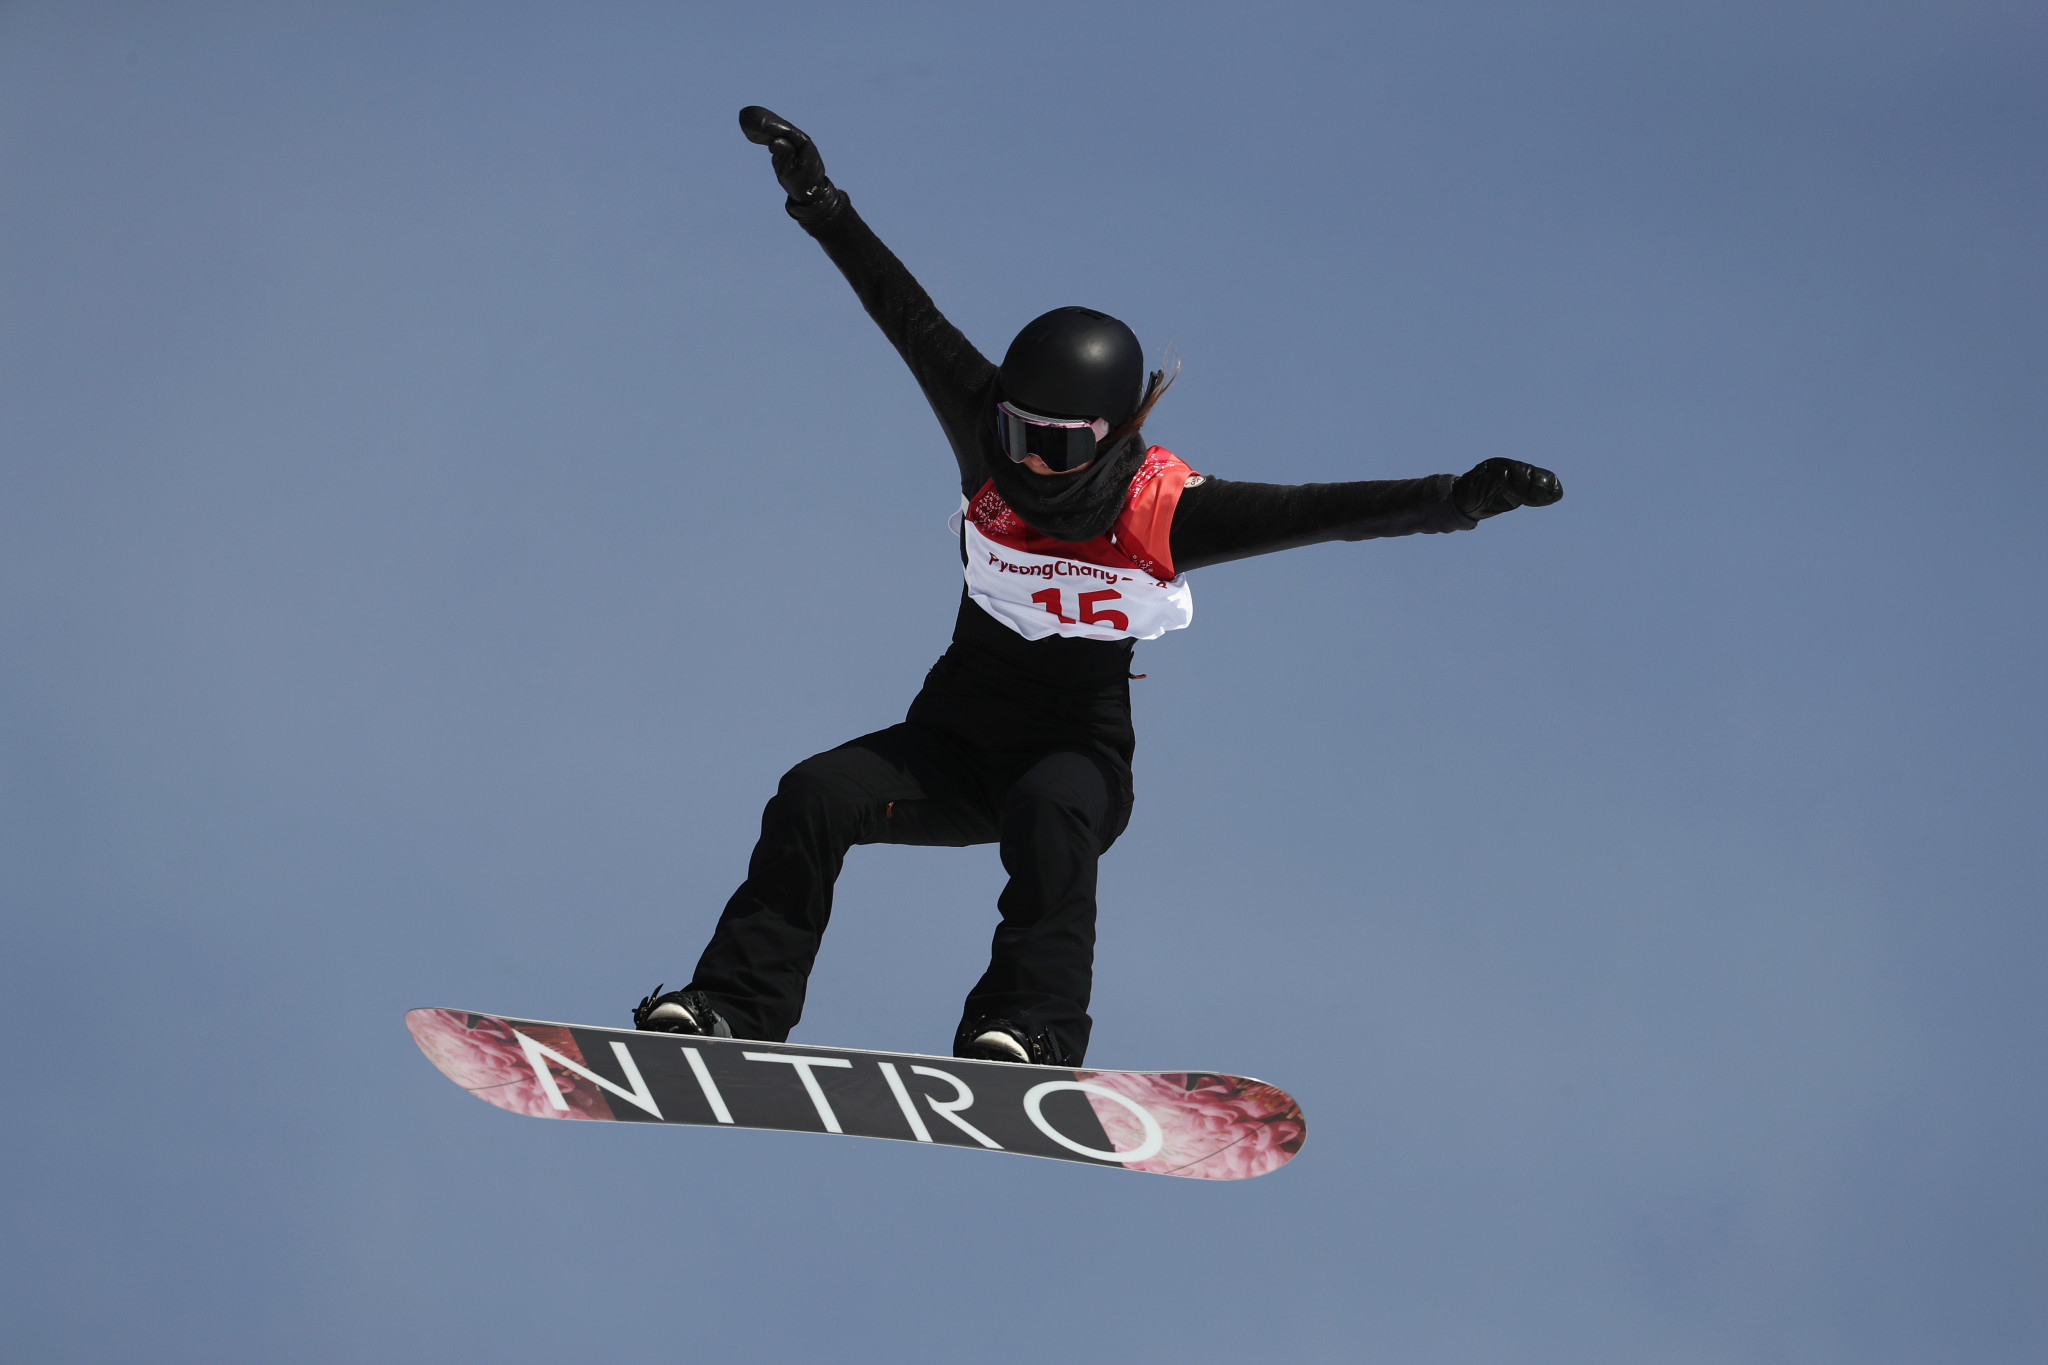 Voigt and Farrell top qualifying at FIS Snowboard Slopestyle World Cup event missing big names 